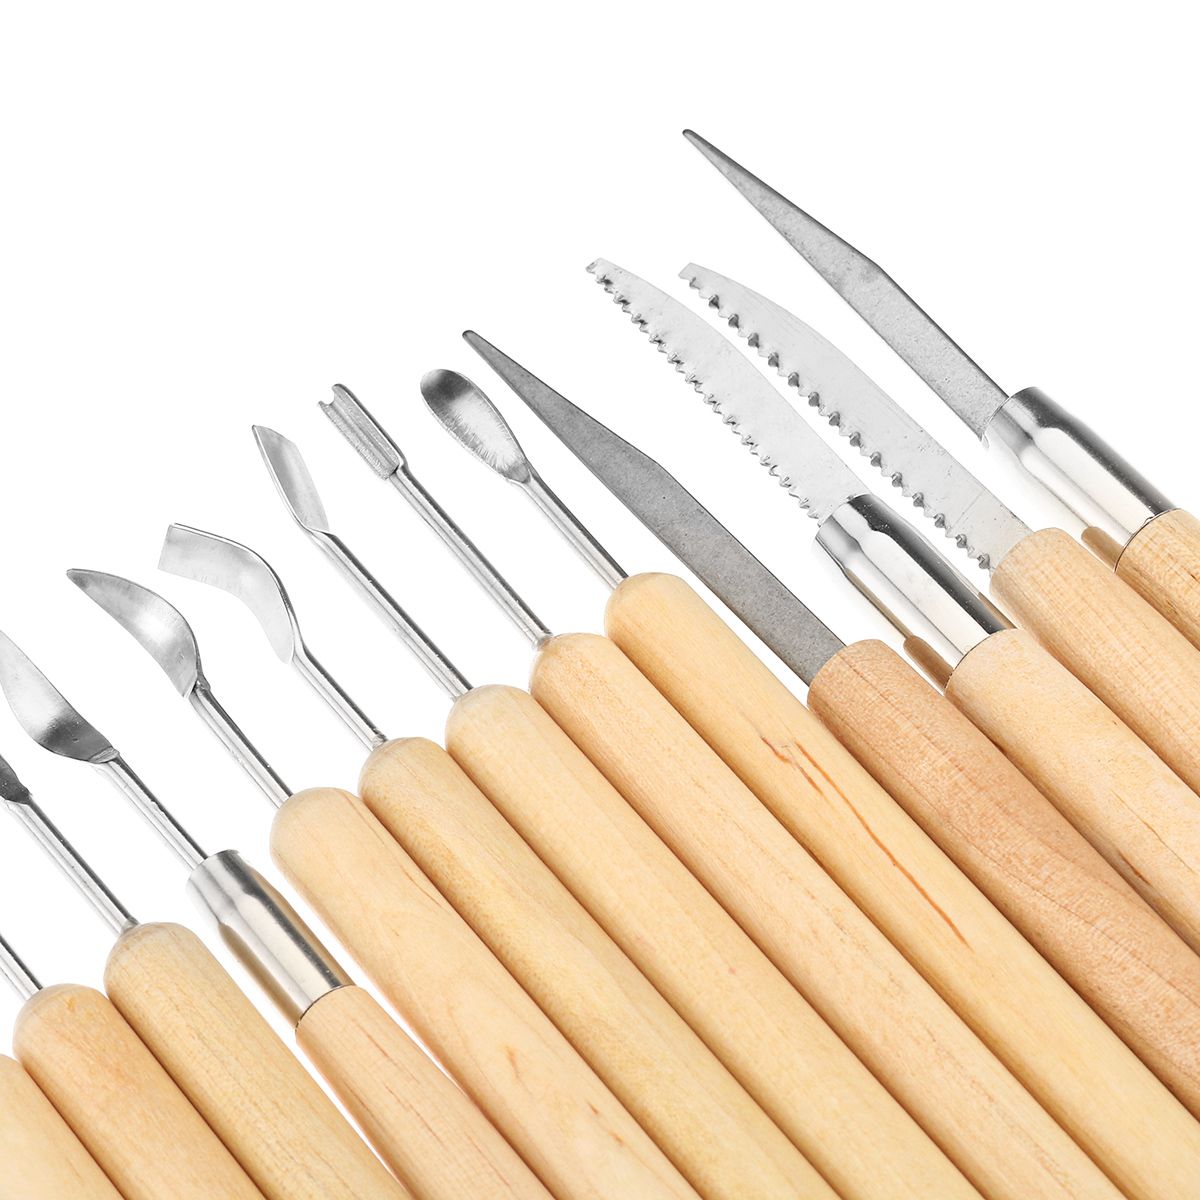 42Pcs-Wooden-Clay-Sculpting-Tools-Pottery-Carving-Tool-Set-Modeling-Craft-Hobby-1228614